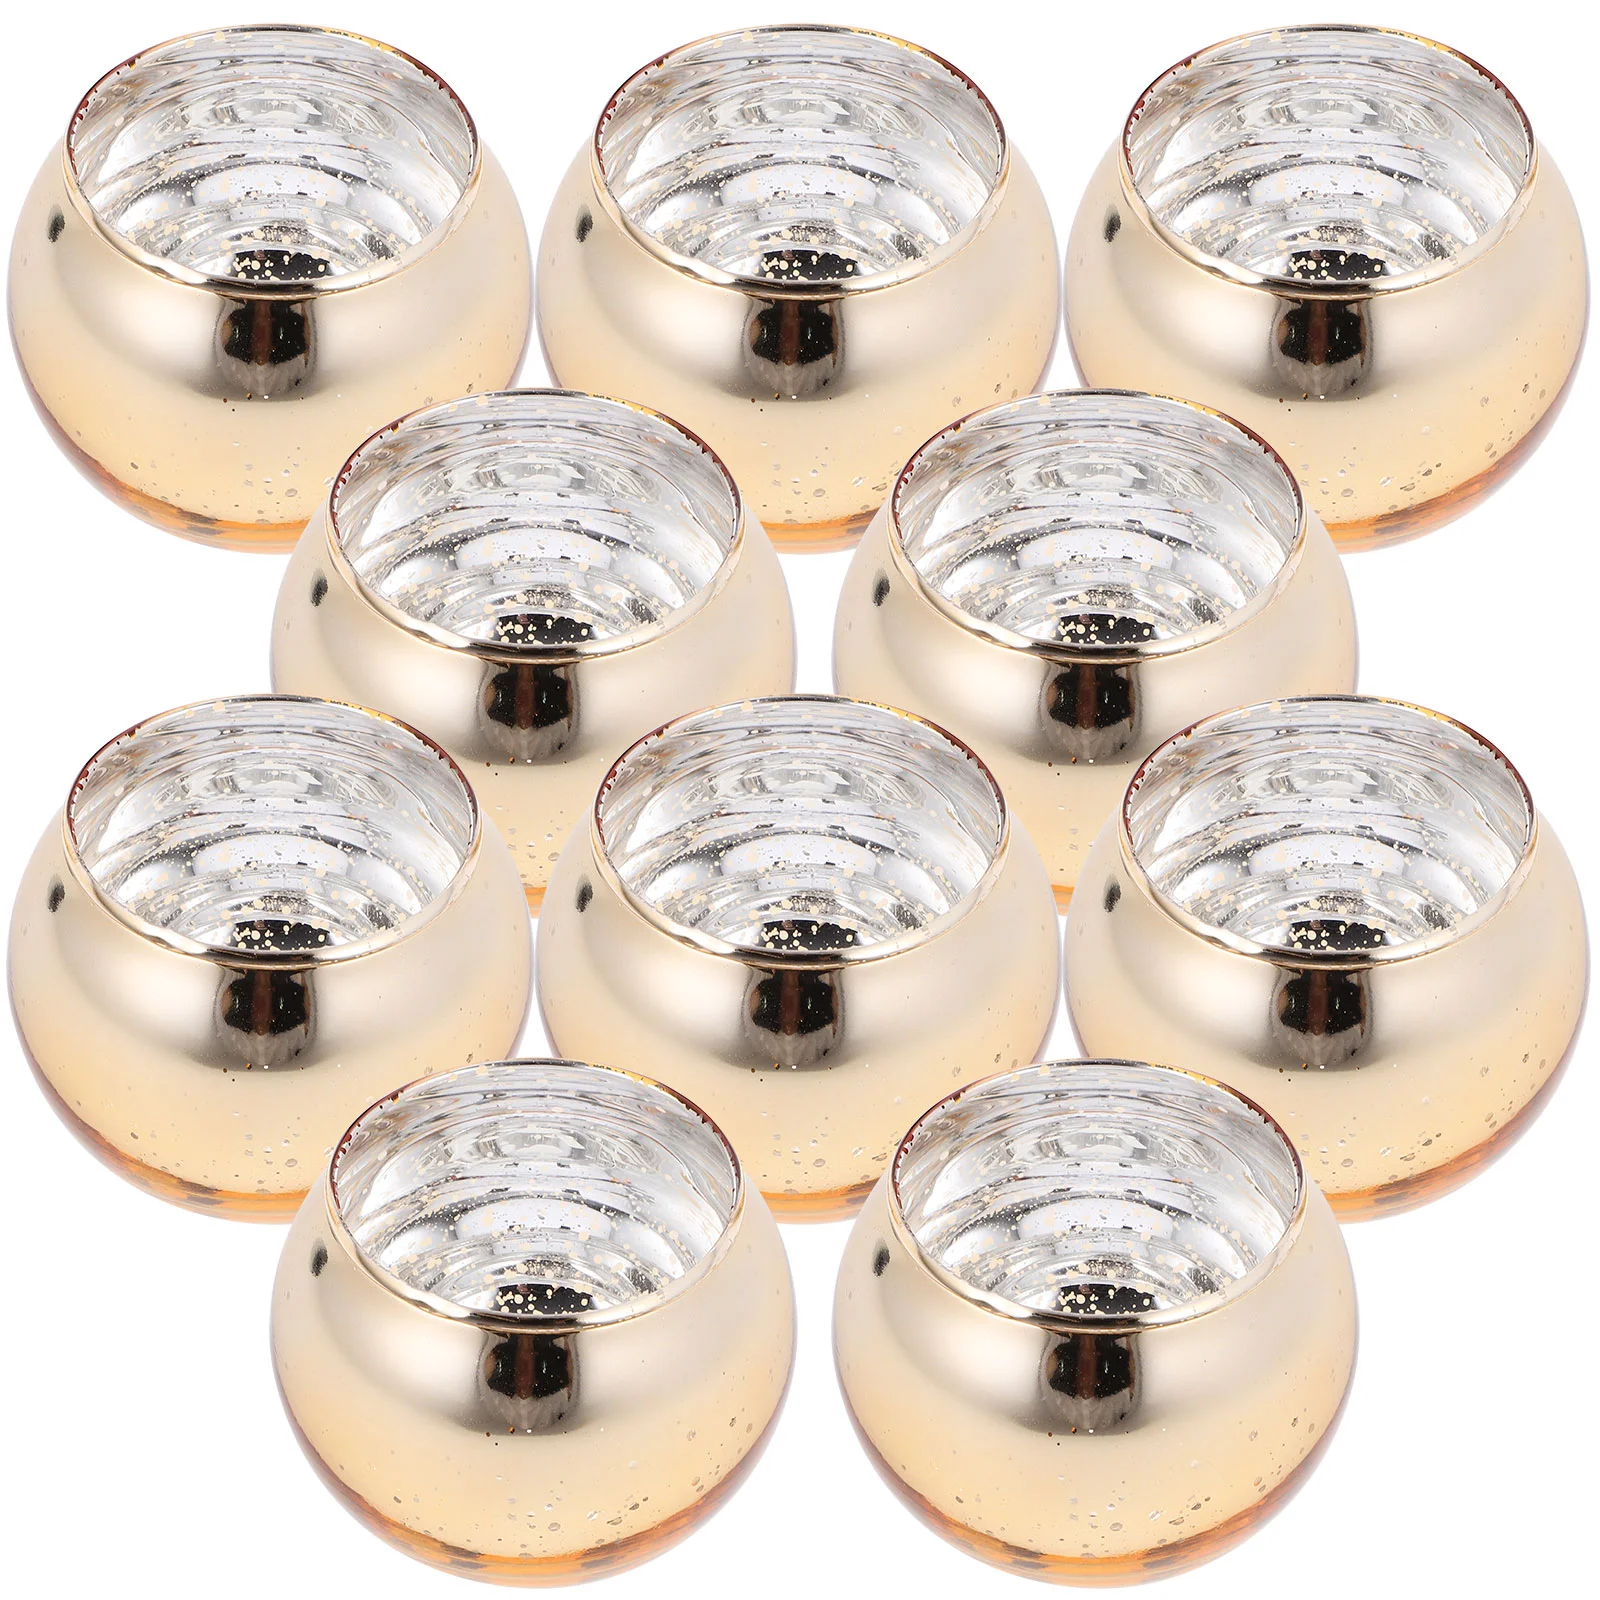 

12 Pcs Tins Ball Glass Holder Tealight Jar Desktop Small Storage Container Votive Candles Holders Table Centerpieces